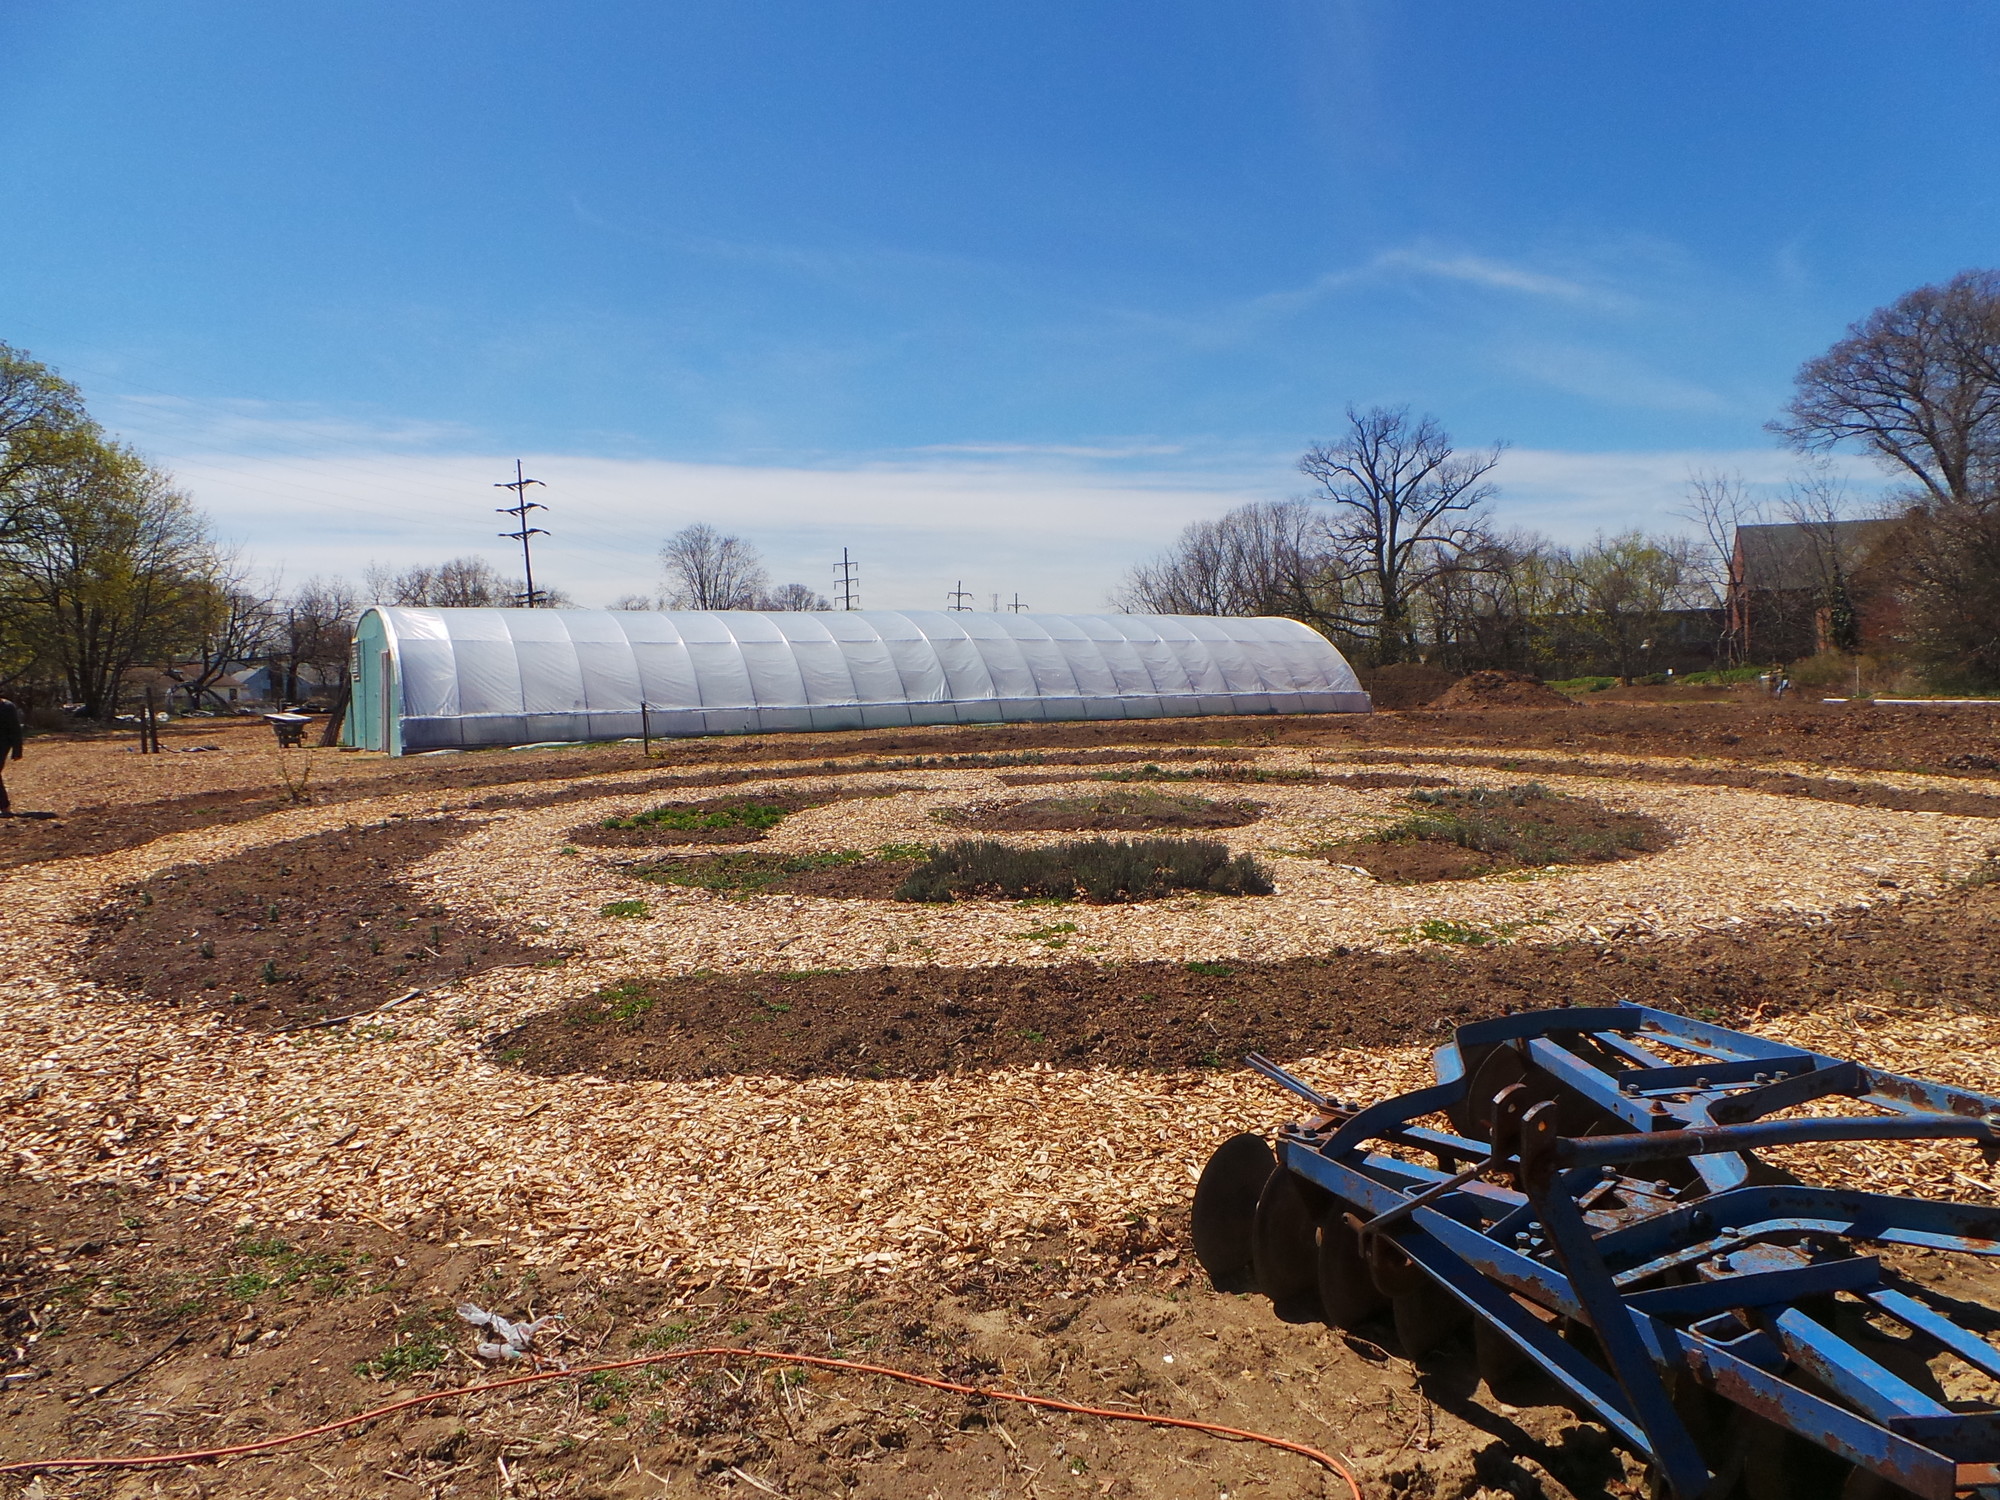 A well-designed herb circle is already growing at the farm.